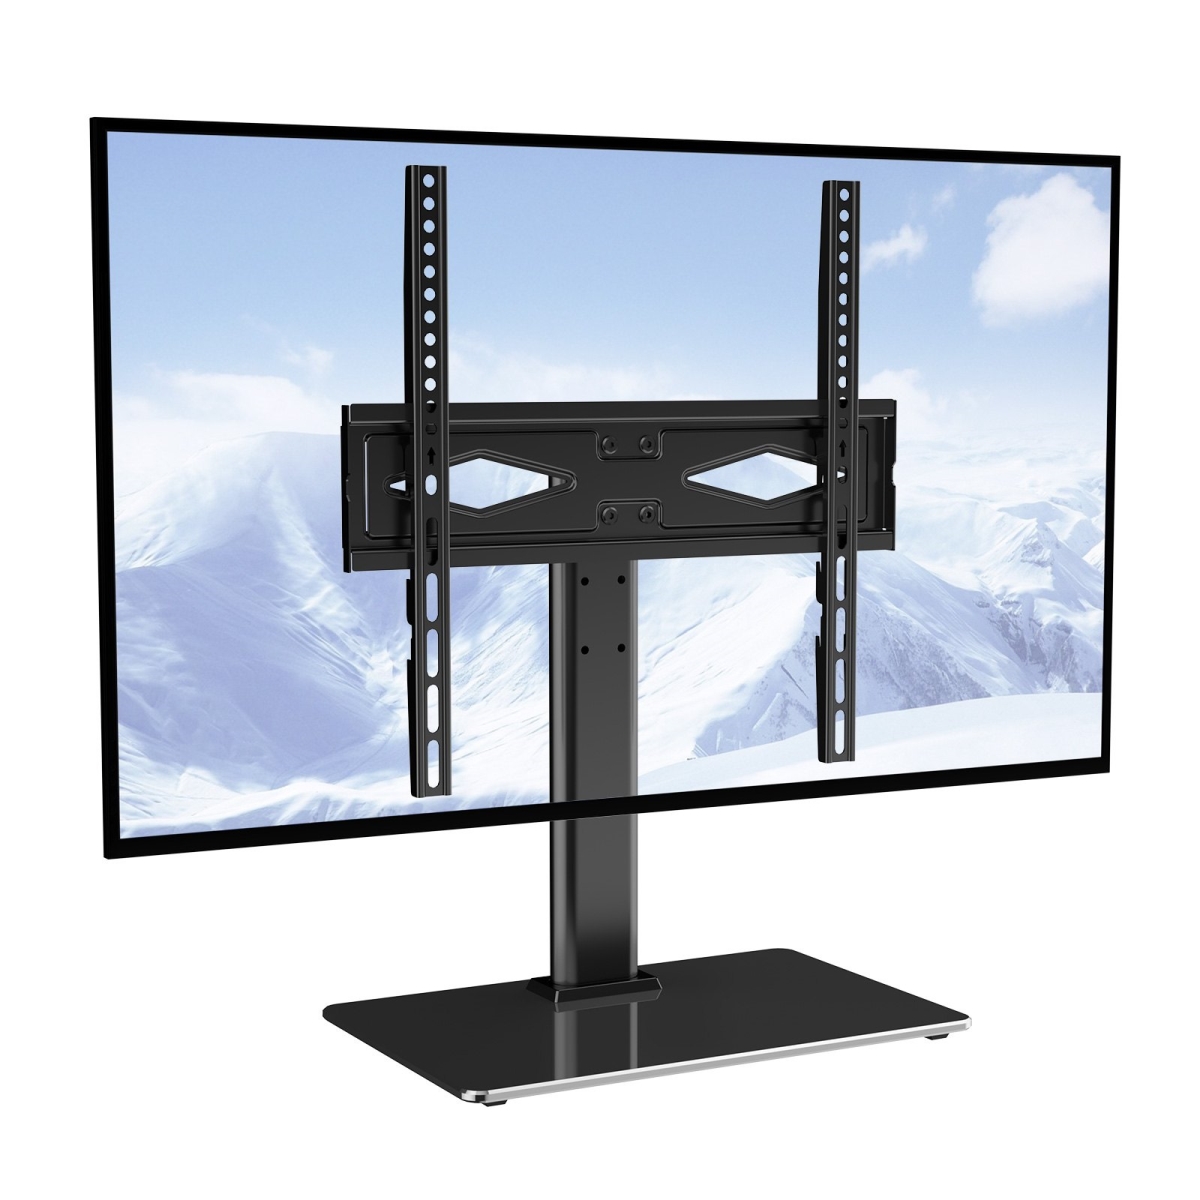 Picture of Vevor LDDSZJGDZXG55I5UNV0 Swivel Universal TV Stand for 32 to 55 in. TV